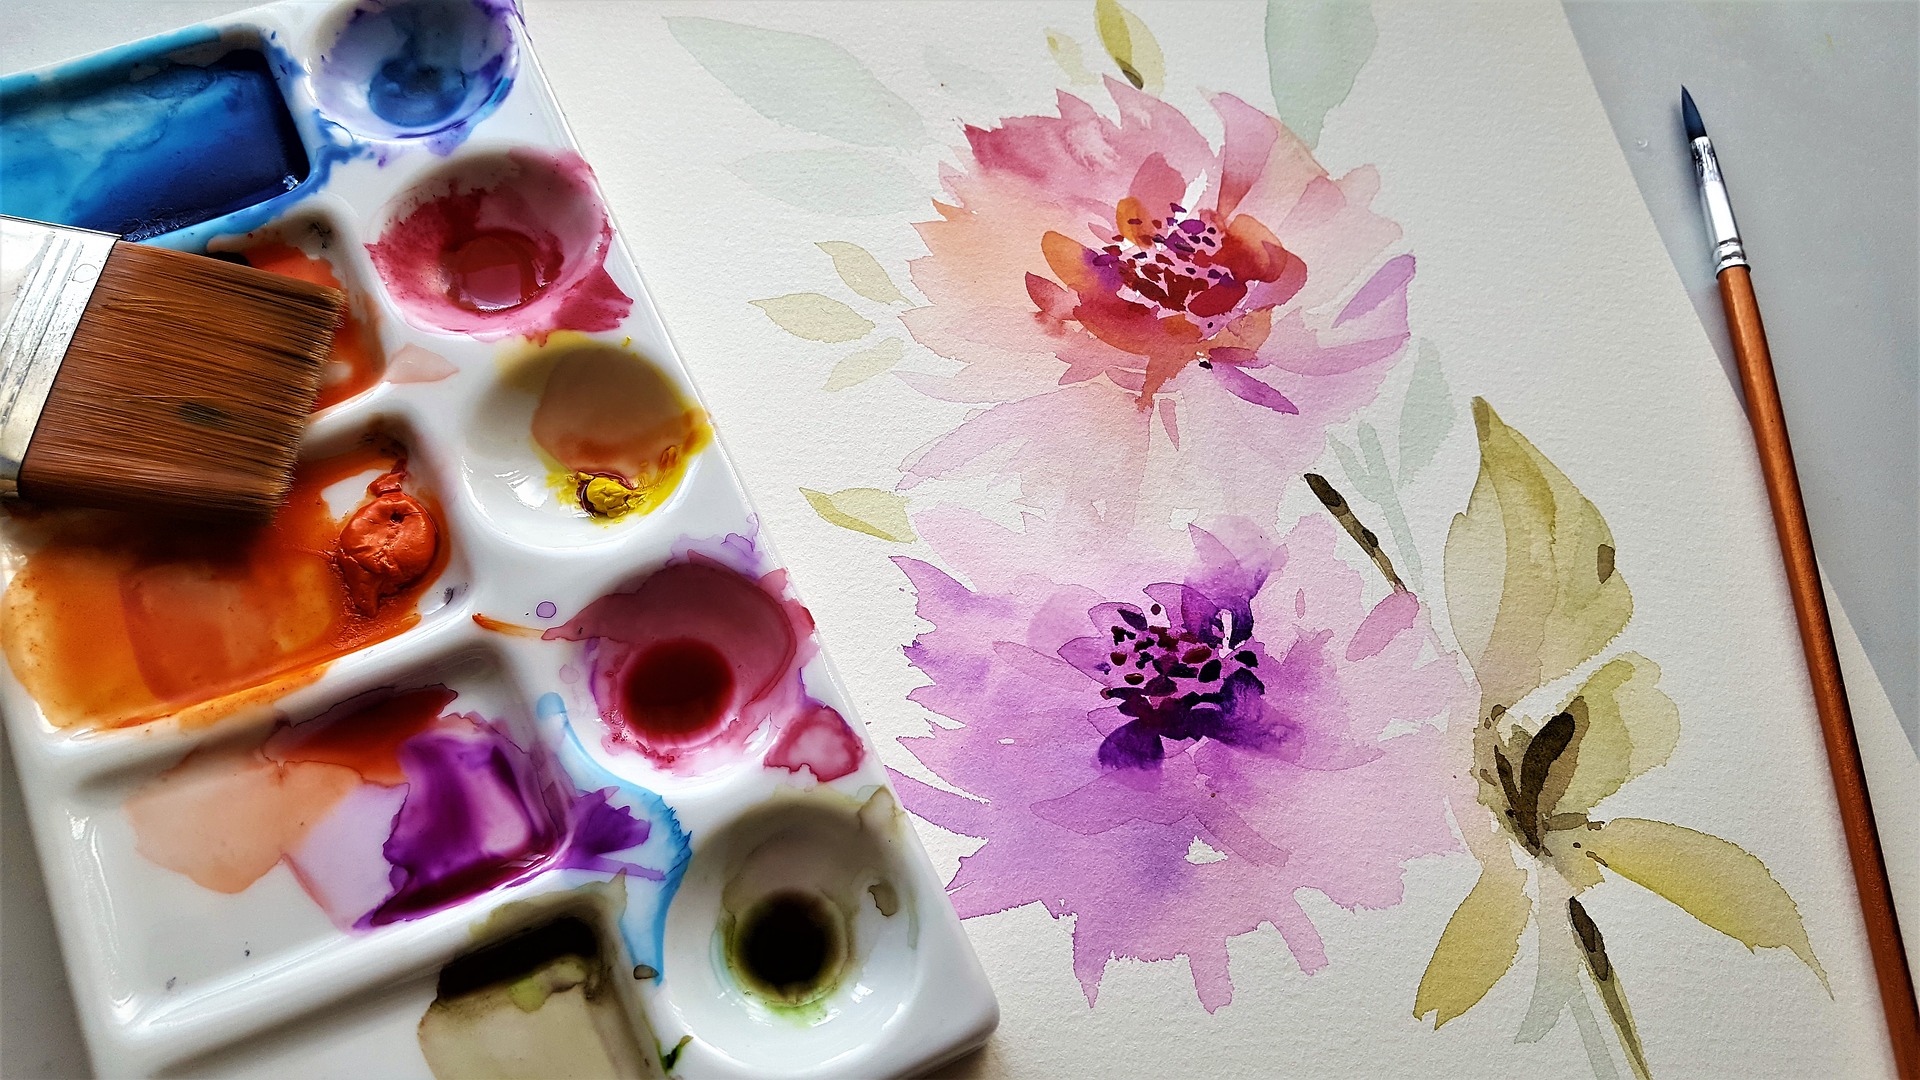 Vernon Community Arts Centre - Abstract Florals Workshop with Pen, Ink, & Watercolour